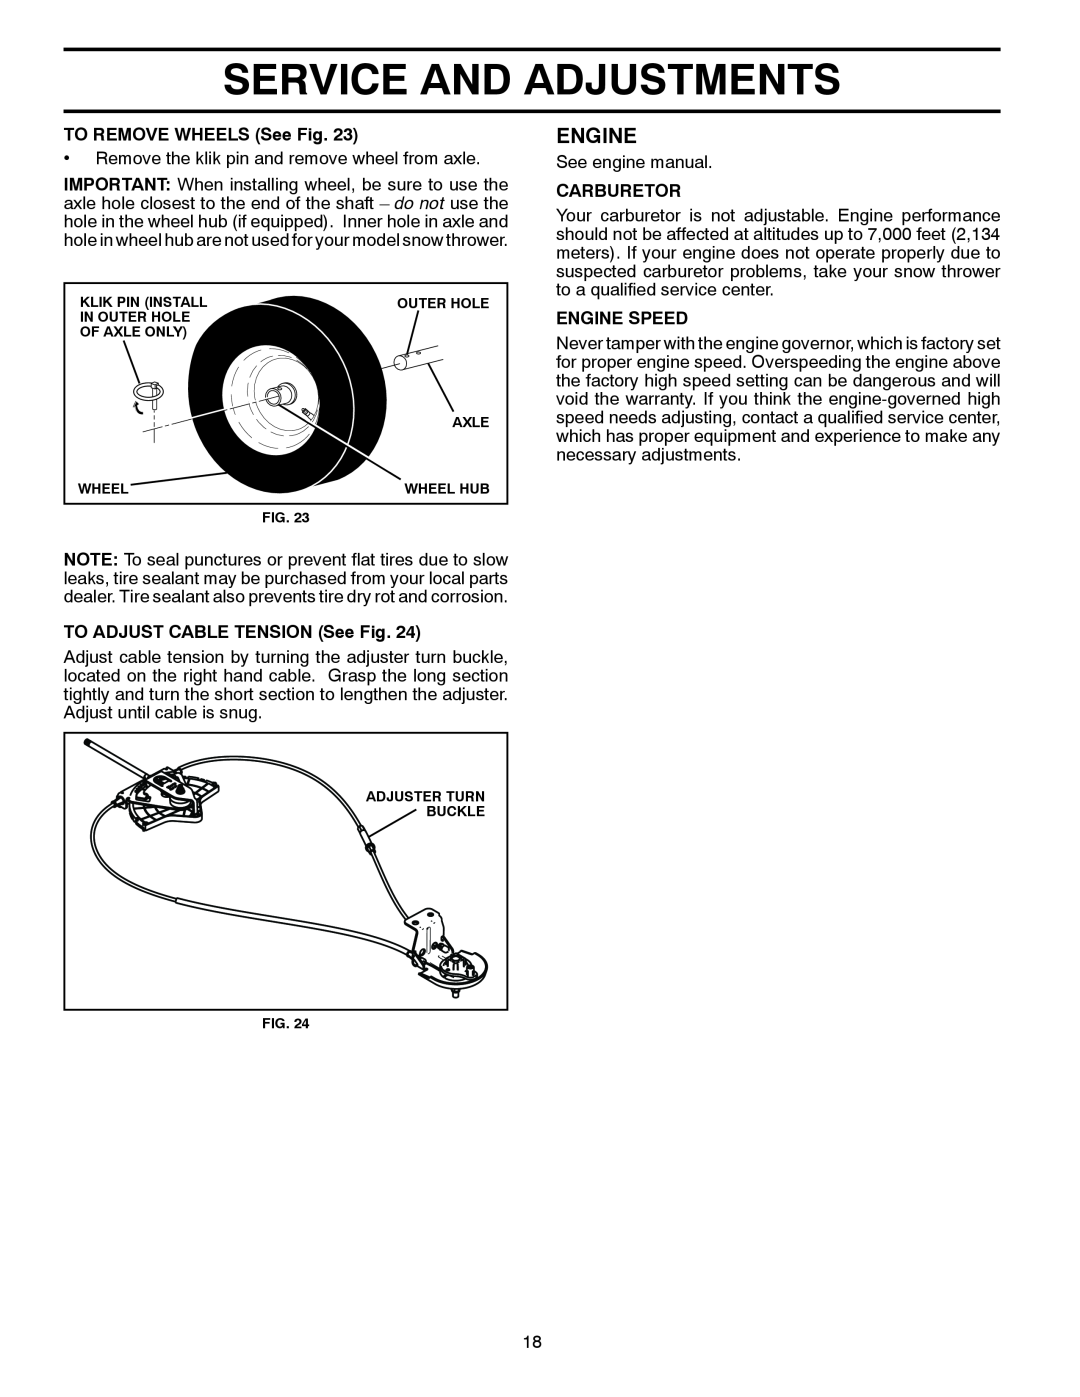 Husqvarna 1830HV Service And Adjustments, Engine, TO REMOVE WHEELS See Fig, TO ADJUST CABLE TENSION See Fig, Carburetor 